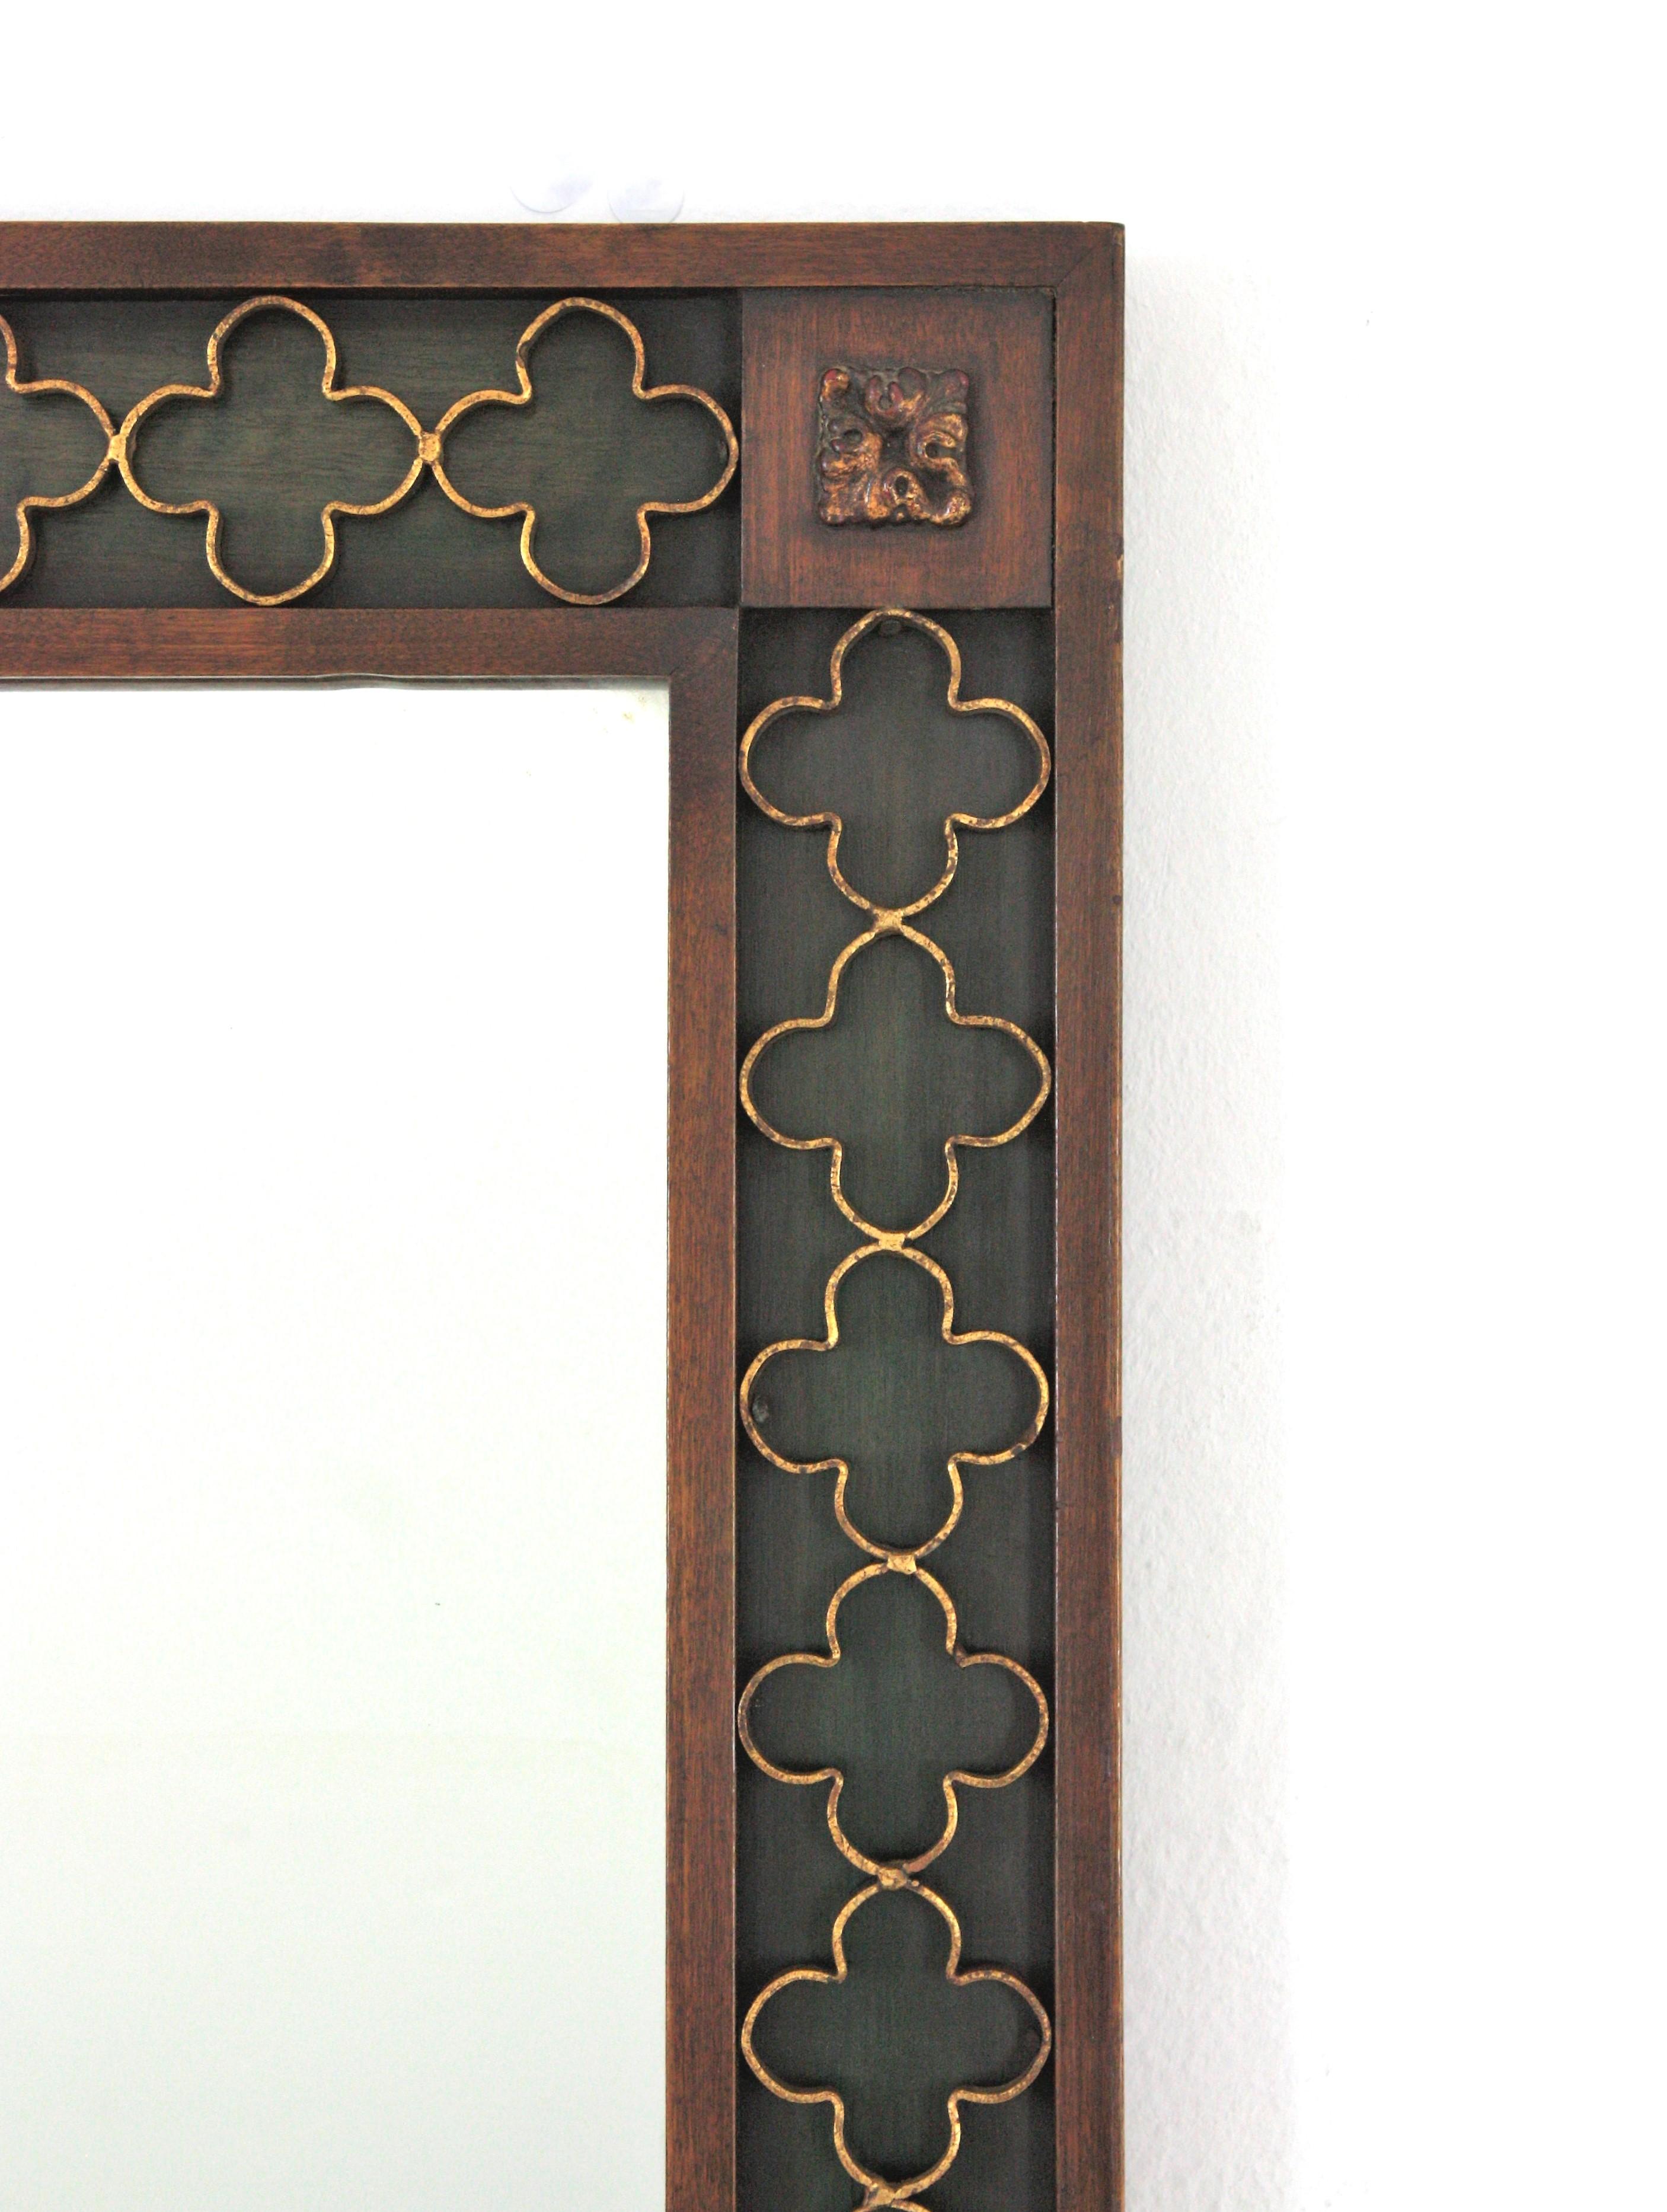 Painted Spanish Revival Rectangular Mirror with Gilt Iron Rosettes Frame